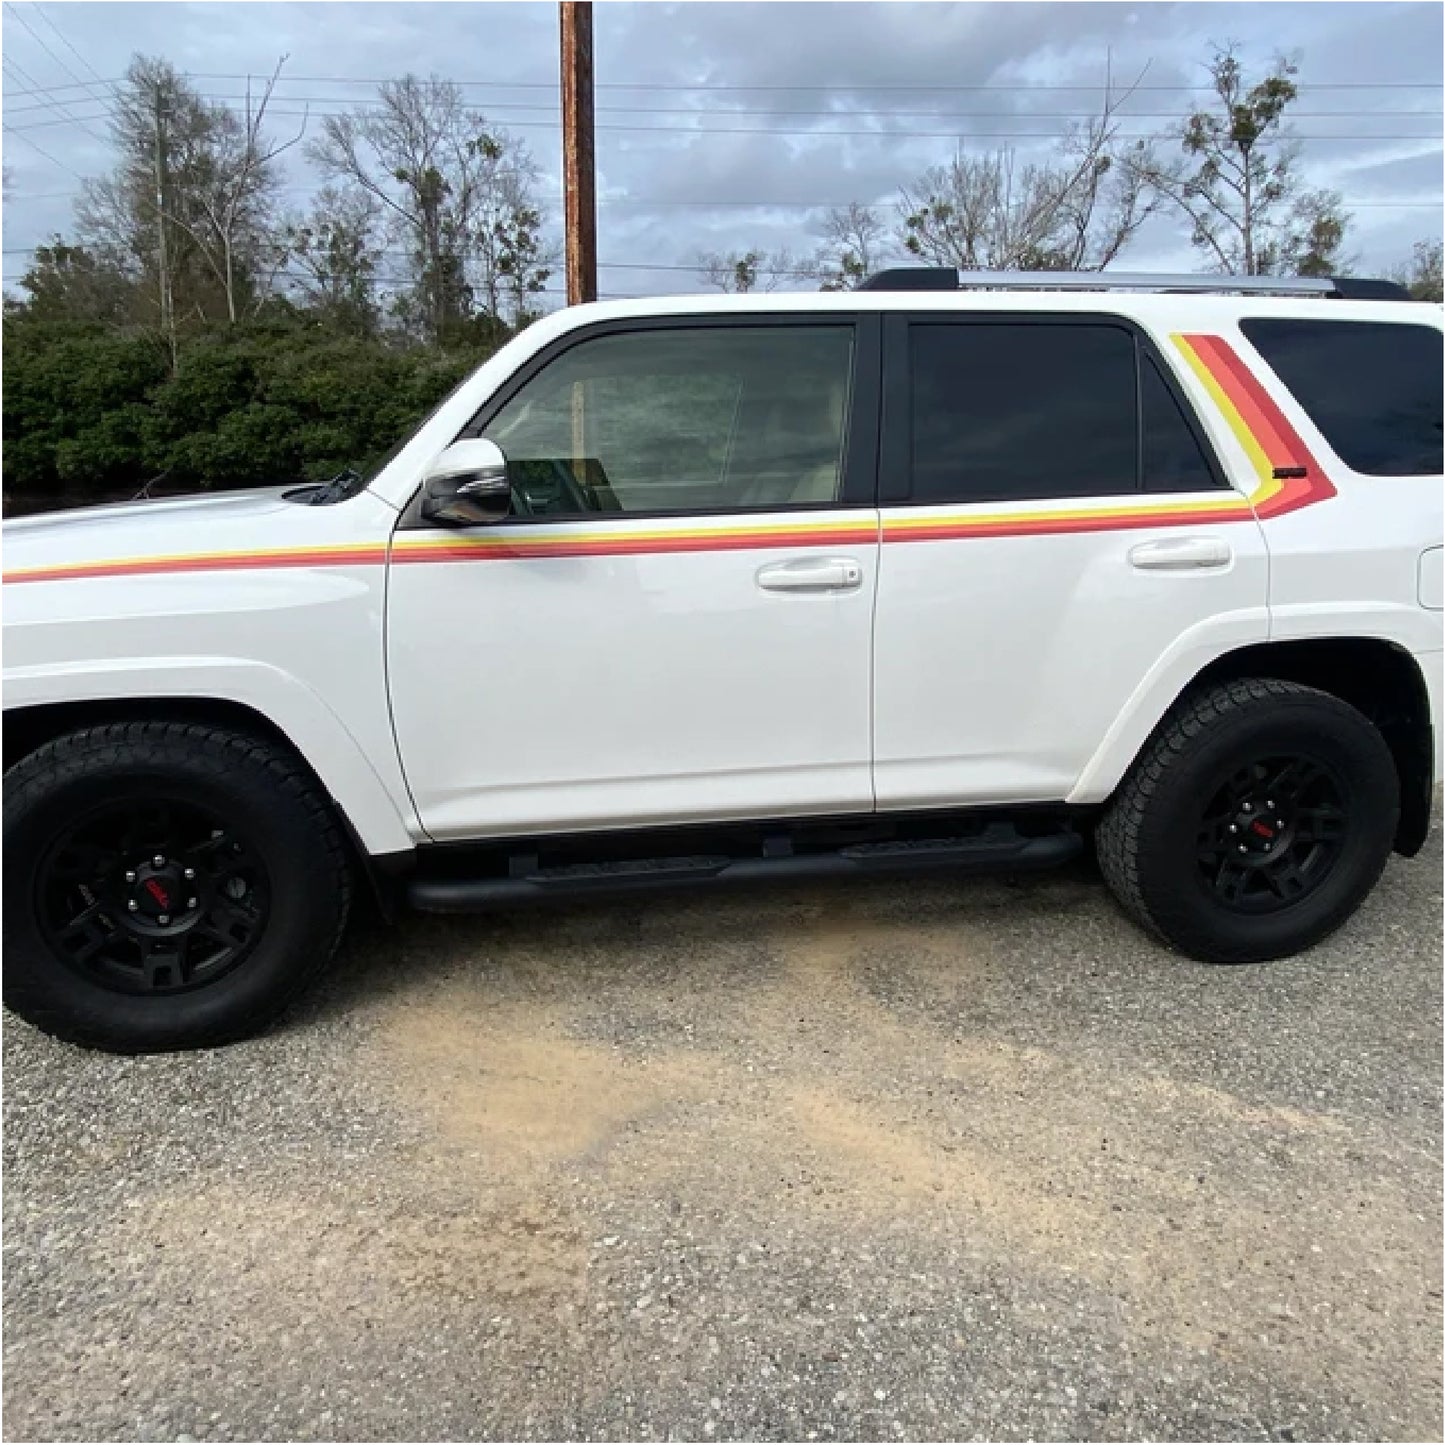 White Toyota 4runner with retro side stripe graphics